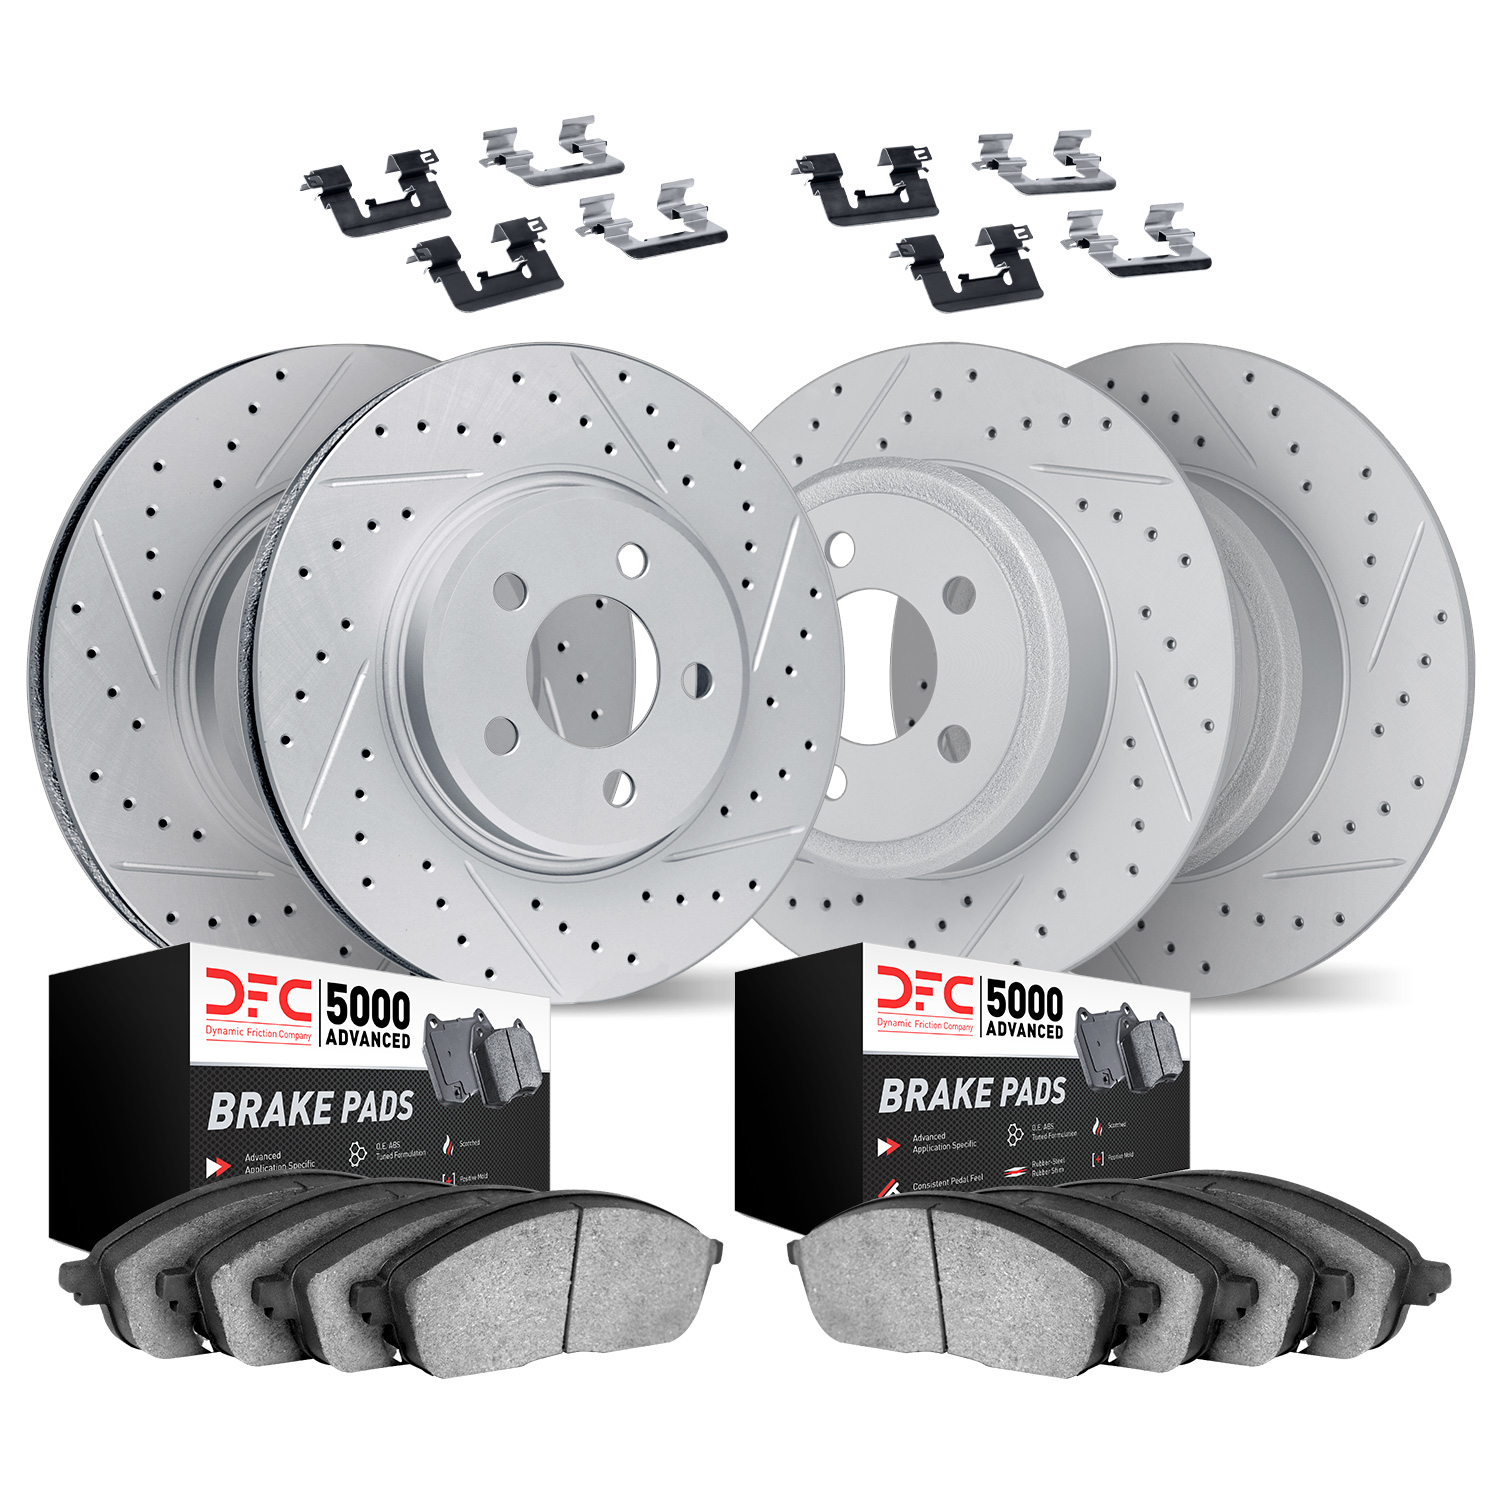 2514-45011 Geoperformance Drilled/Slotted Rotors w/5000 Advanced Brake Pads Kit & Hardware, 2008-2009 GM, Position: Front and Re